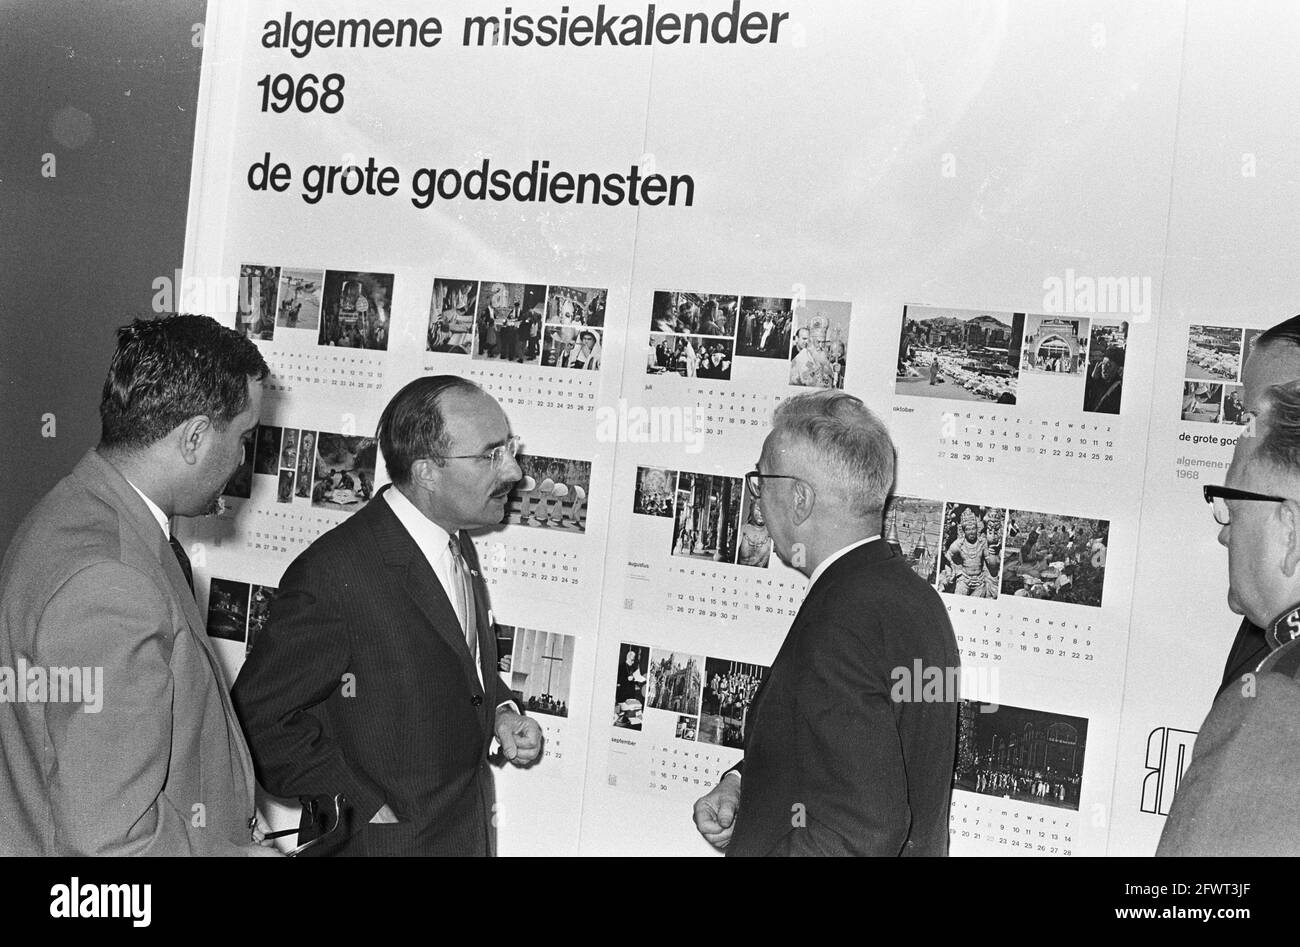 New Mission calendar, introduced by Minister of State Mr. Cals ., September 25, 1967, CALENDARS, The Netherlands, 20th century press agency photo, news to remember, documentary, historic photography 1945-1990, visual stories, human history of the Twentieth Century, capturing moments in time Stock Photo